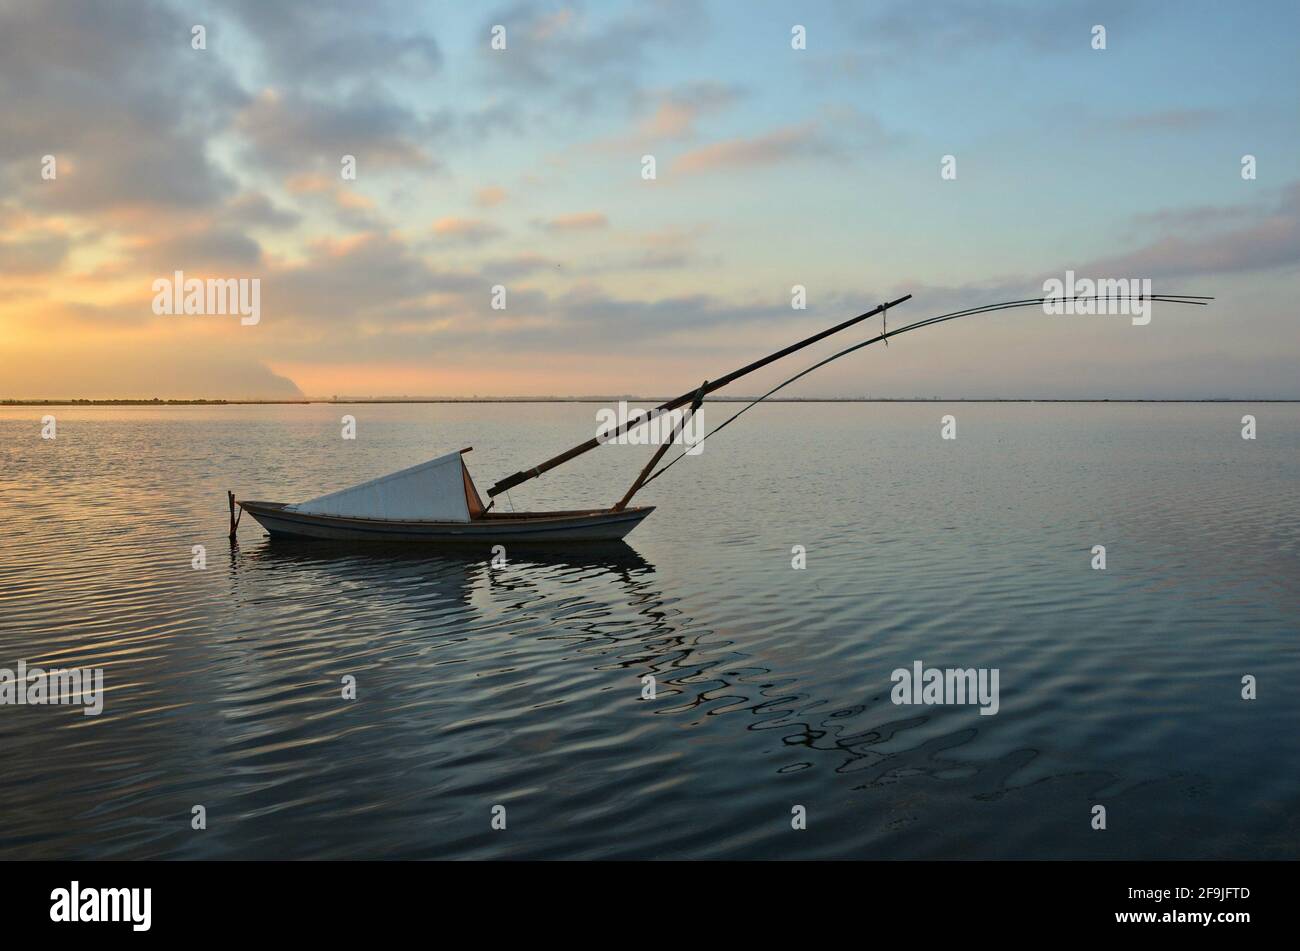 Sunrise landscape with a traditional Gaita fishing boat on the waters of Missolonghi lake in Aetolia-Acarnania, Greece. Stock Photo